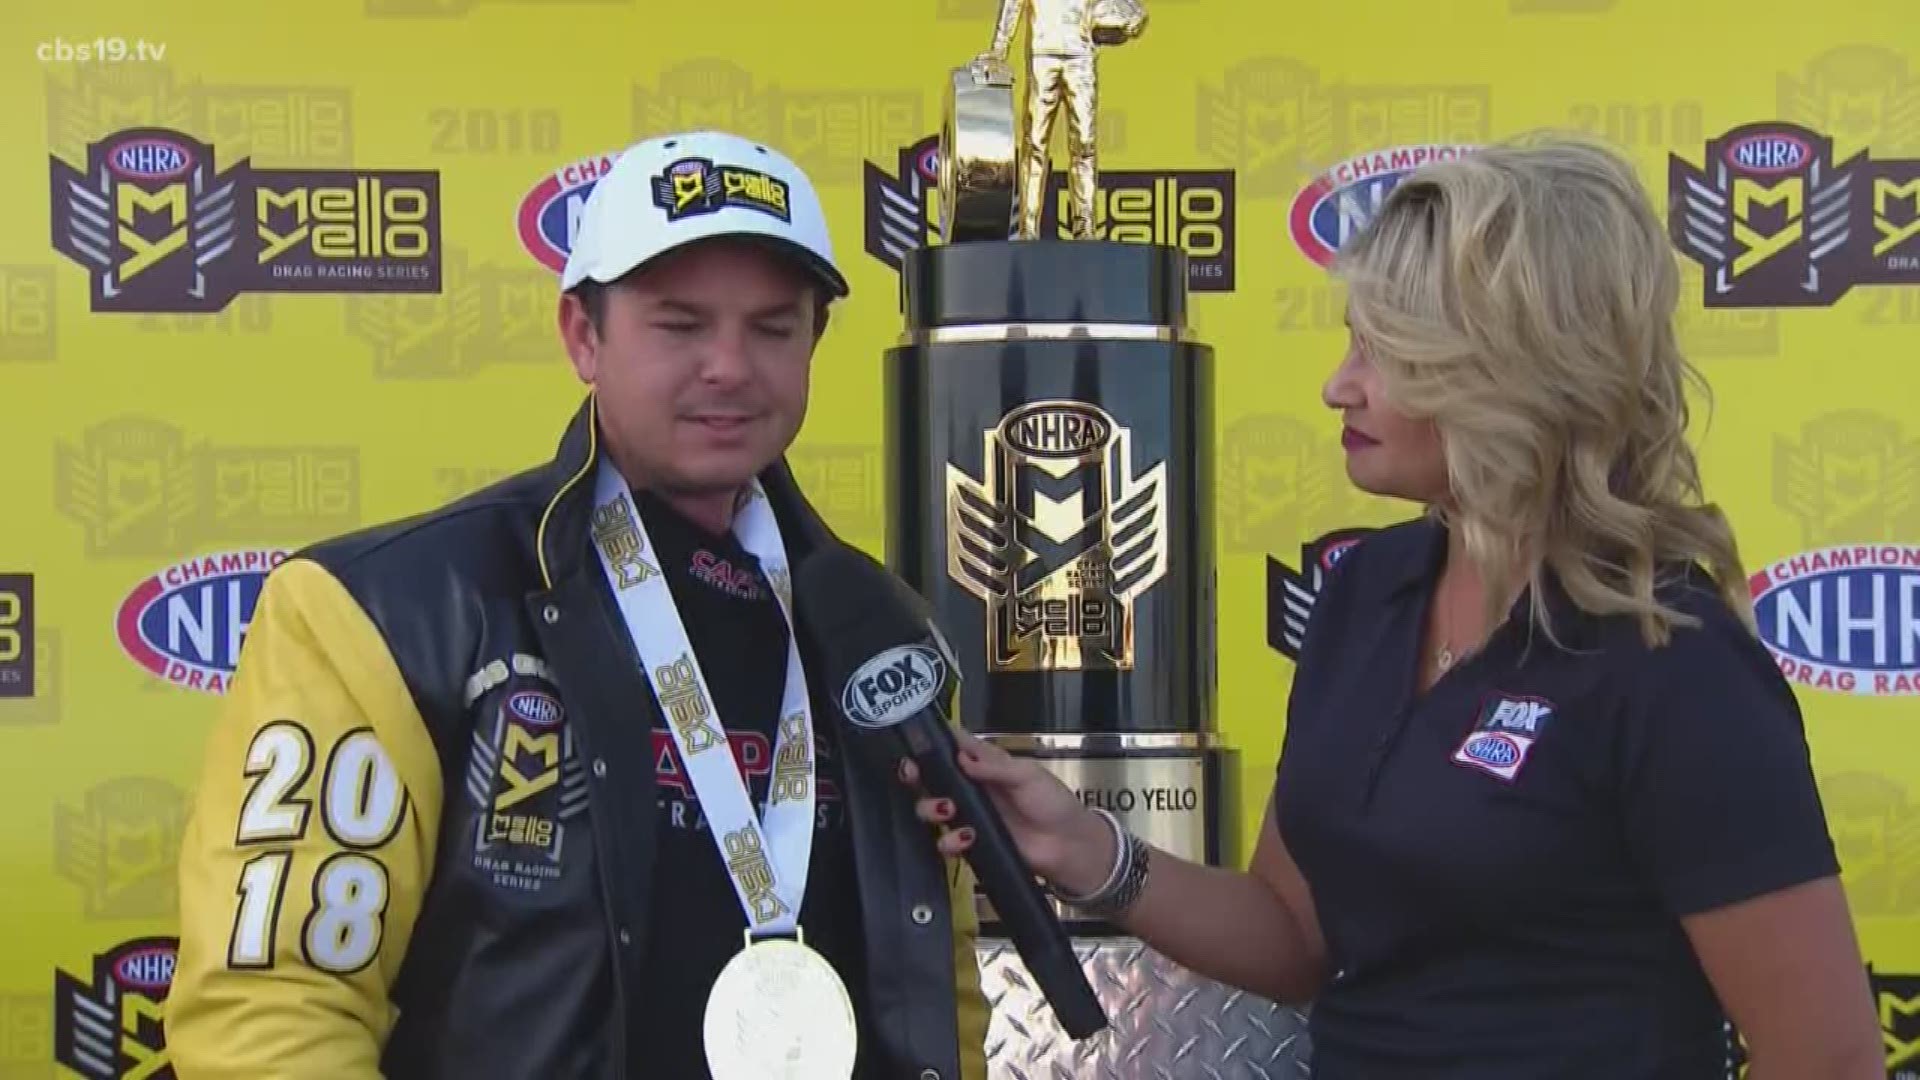 Steve Torrence talks on 19now about racing and what it's like being up for an ESPY.